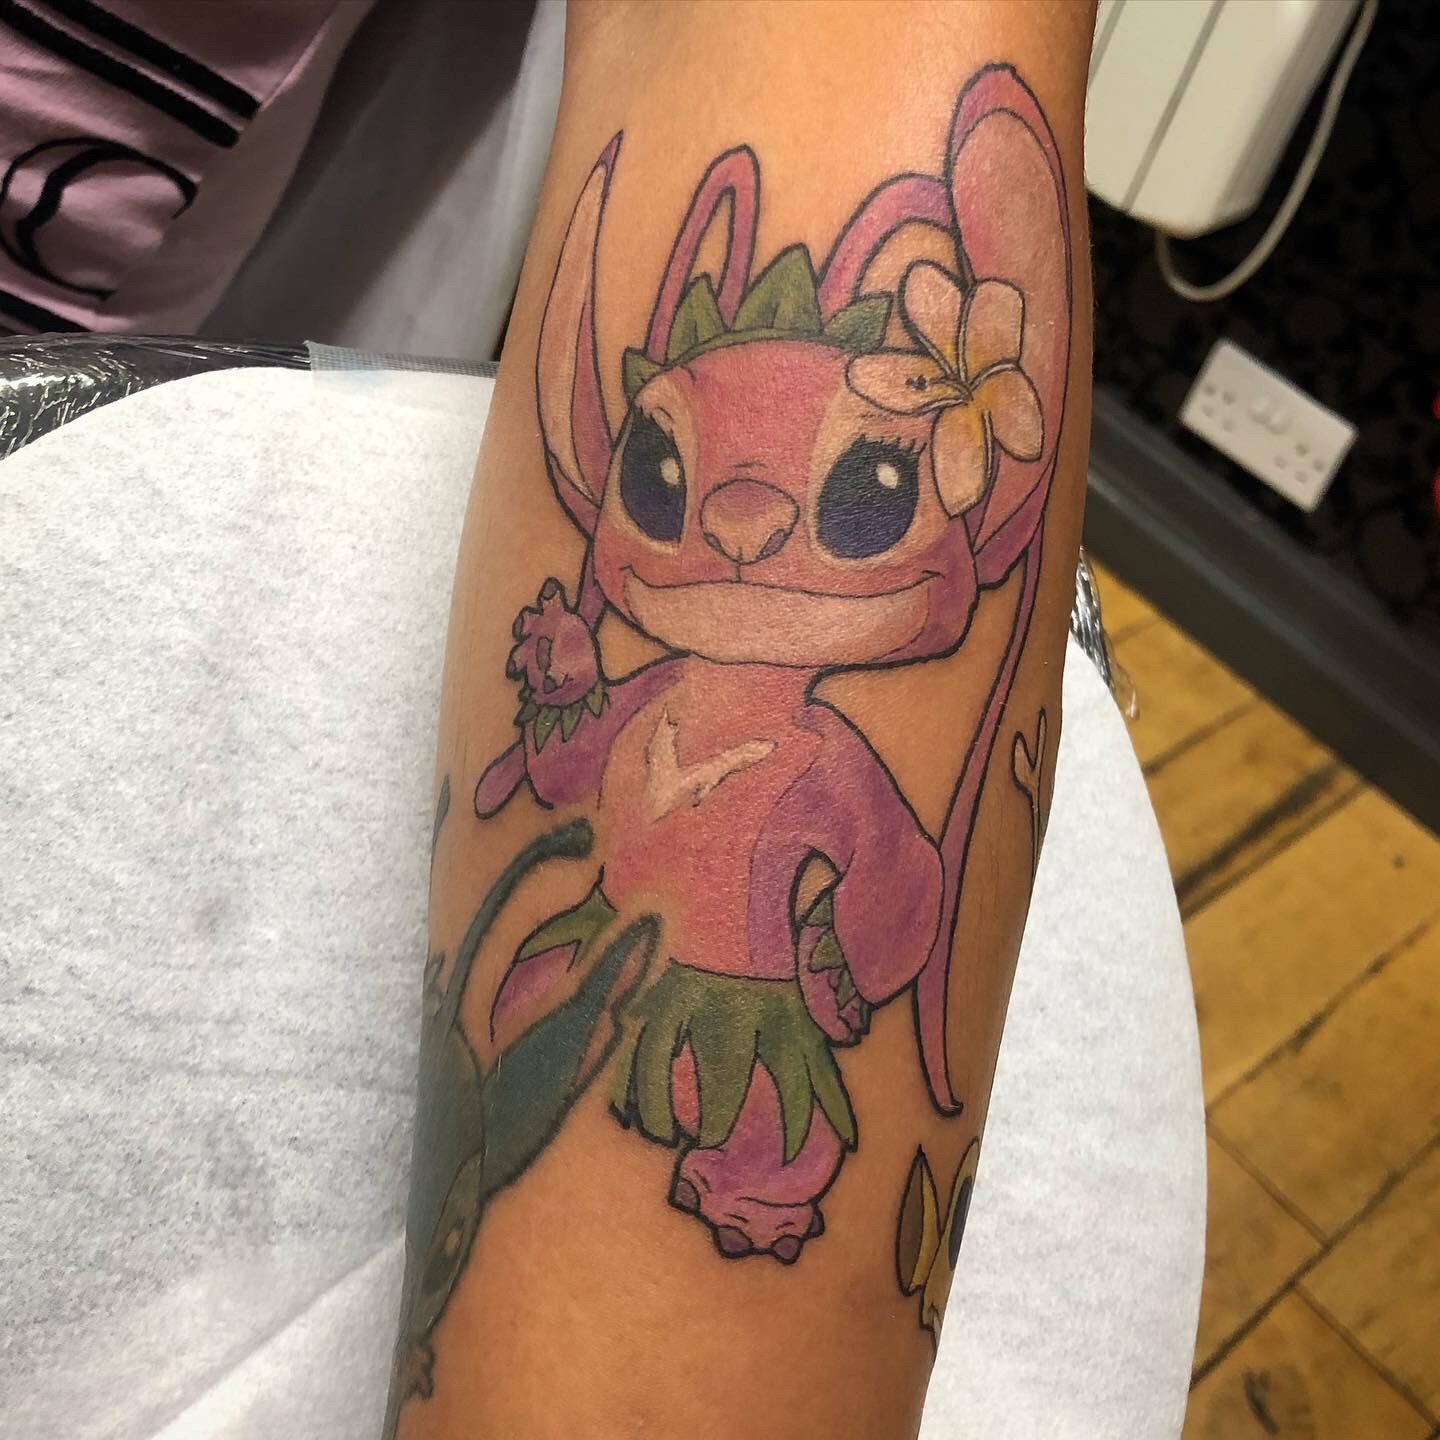  EMGG Angel   on Twitter Well guys Im officially not a tattoo  virgin  got one for matching ones w my mom tattoo INK stitch  toothless httpstcoacaKTcG5iP  Twitter